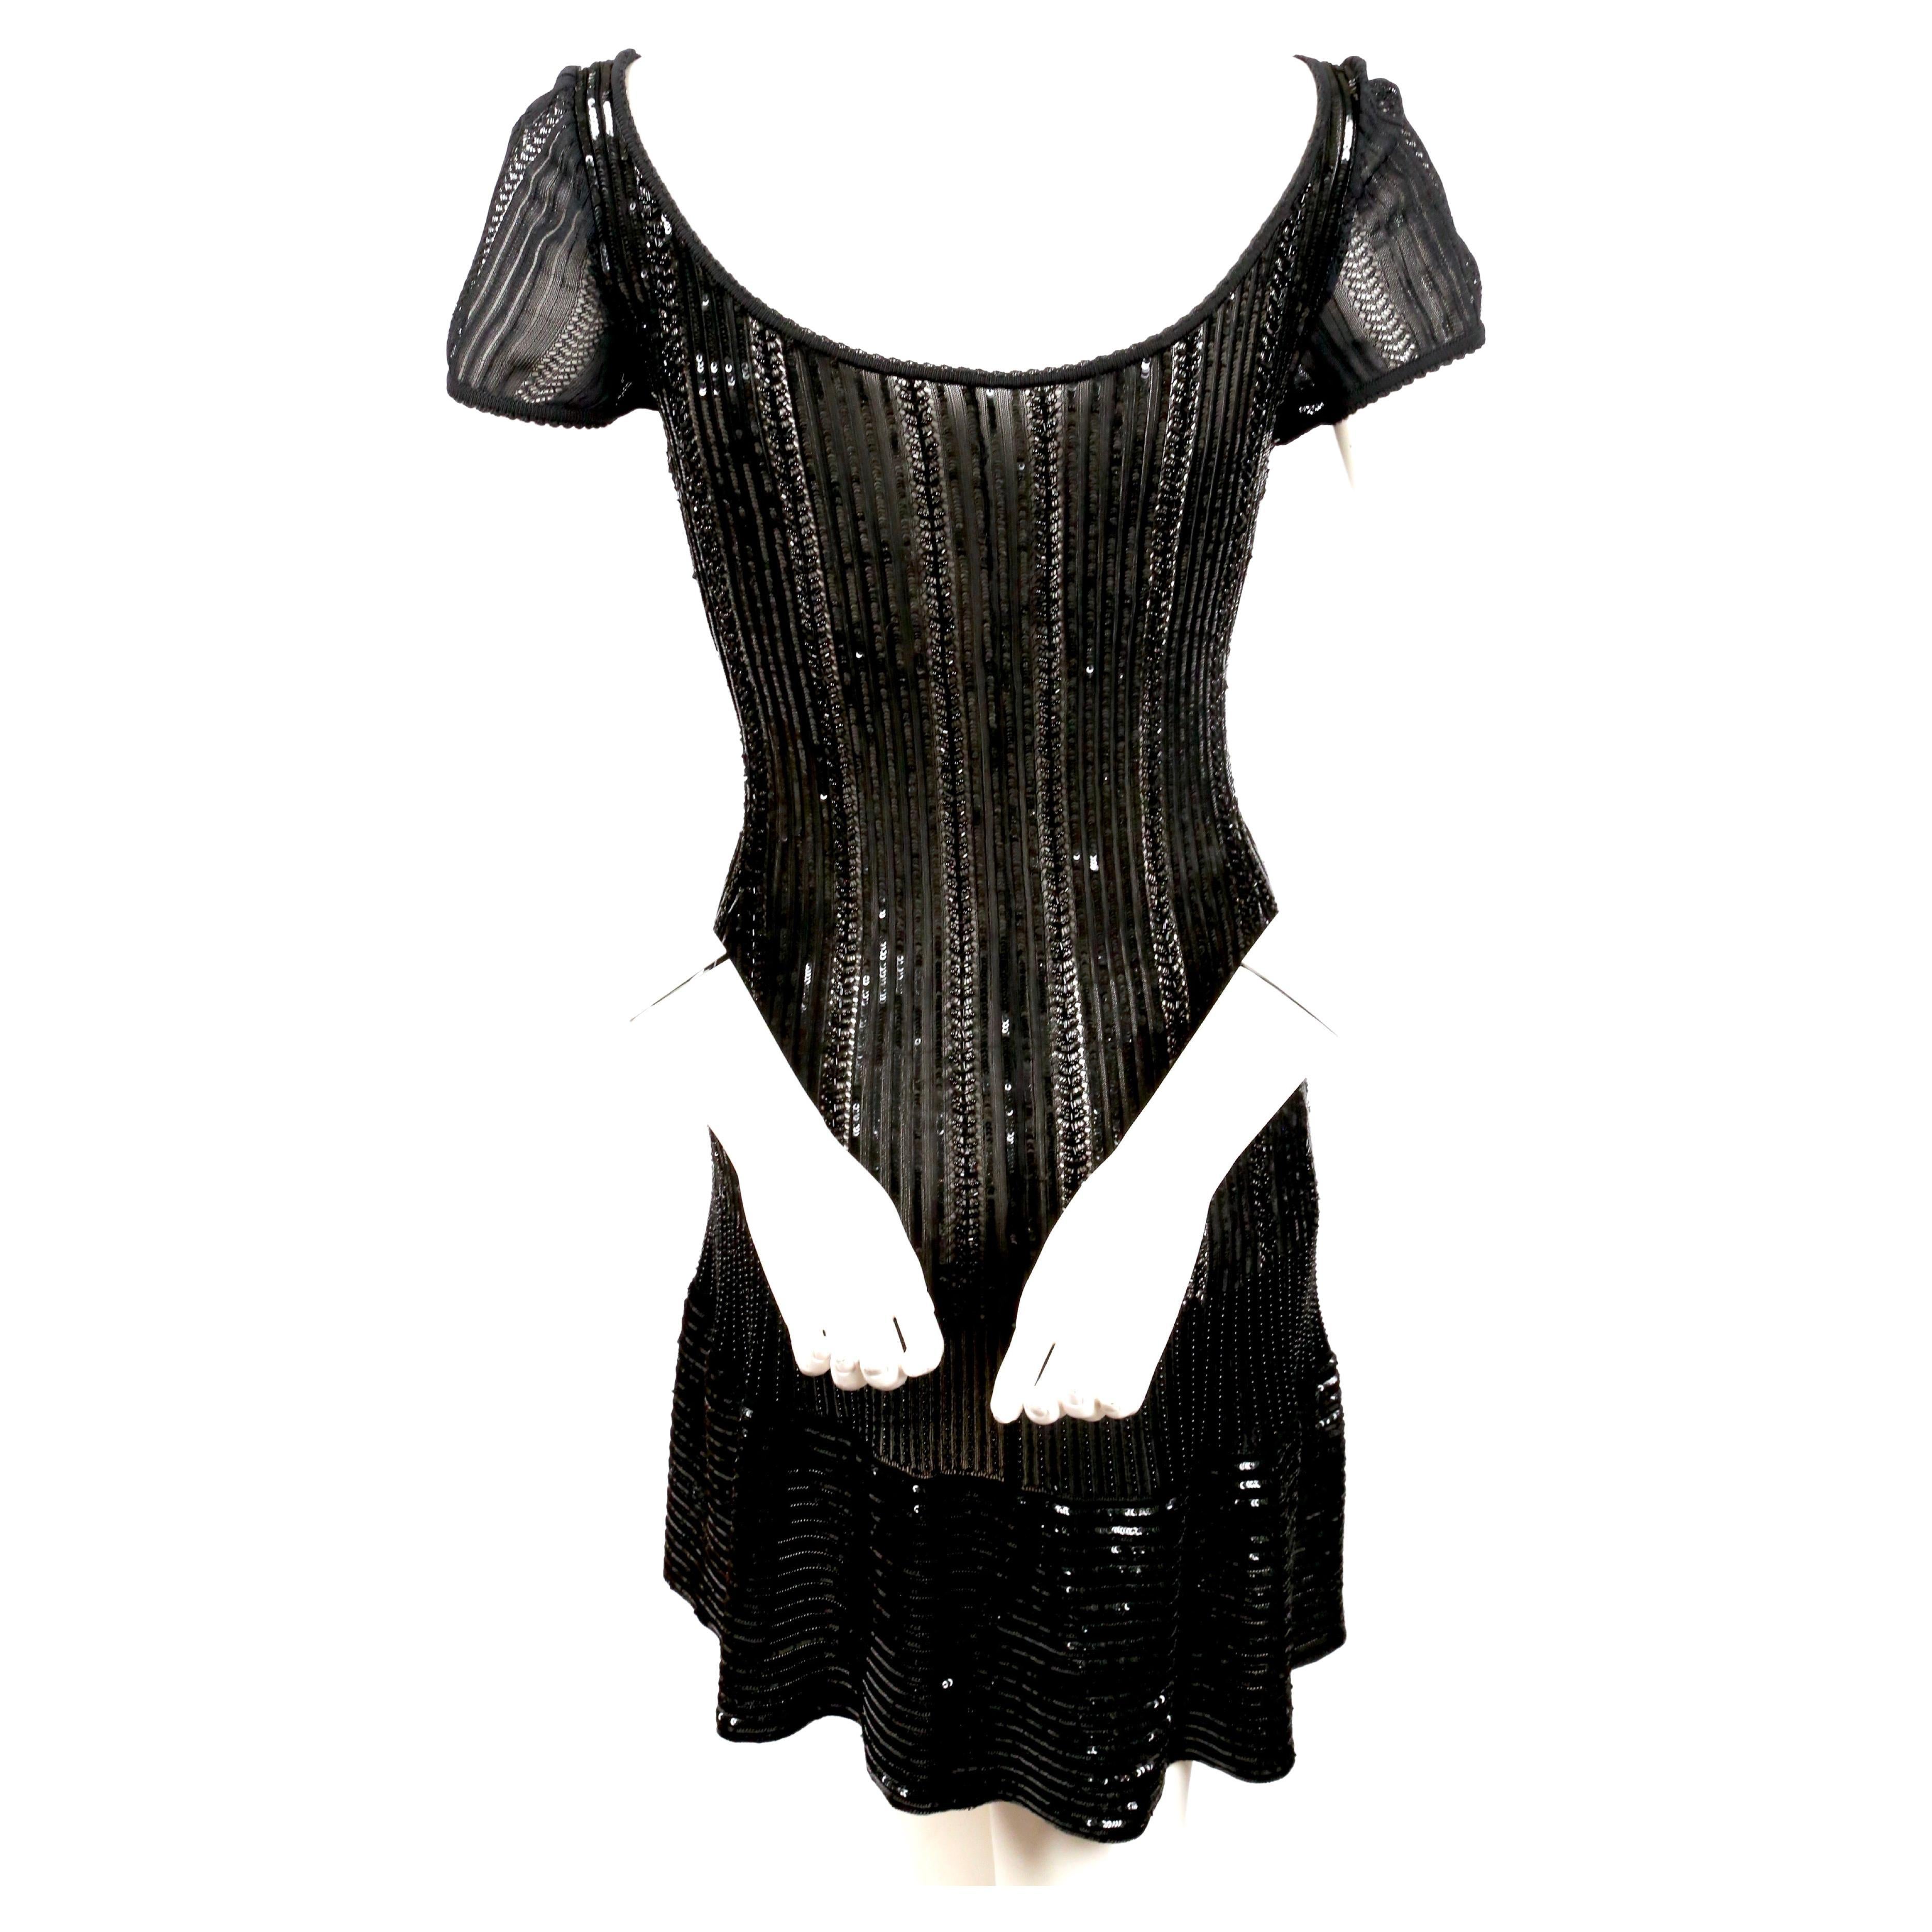 1996 AZZEDINE ALAIA black beaded and micro sequined dress For Sale 1